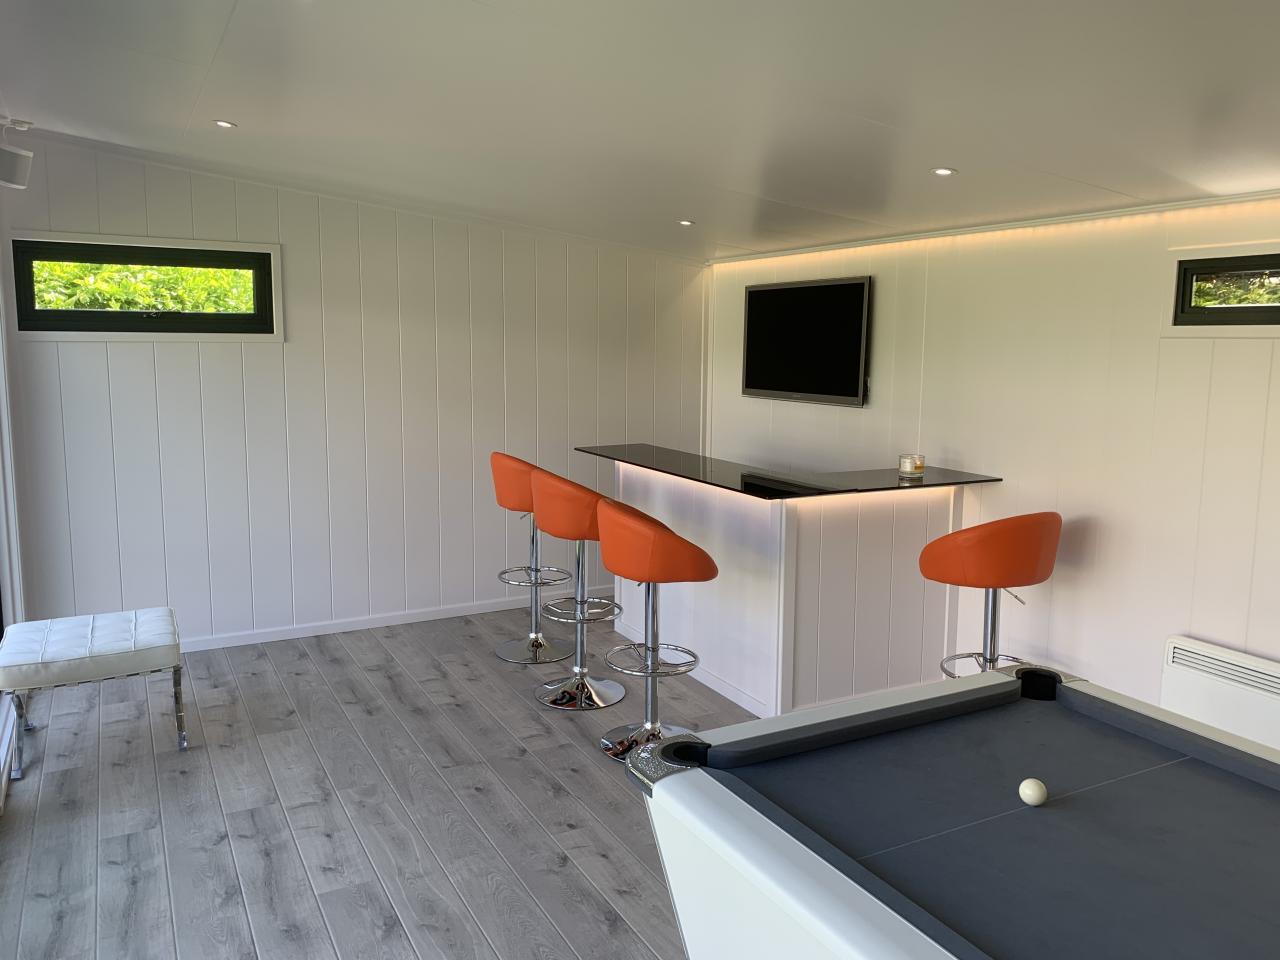 This games room is loved by all the family and is the largest allowed within PD
Ref 5835 